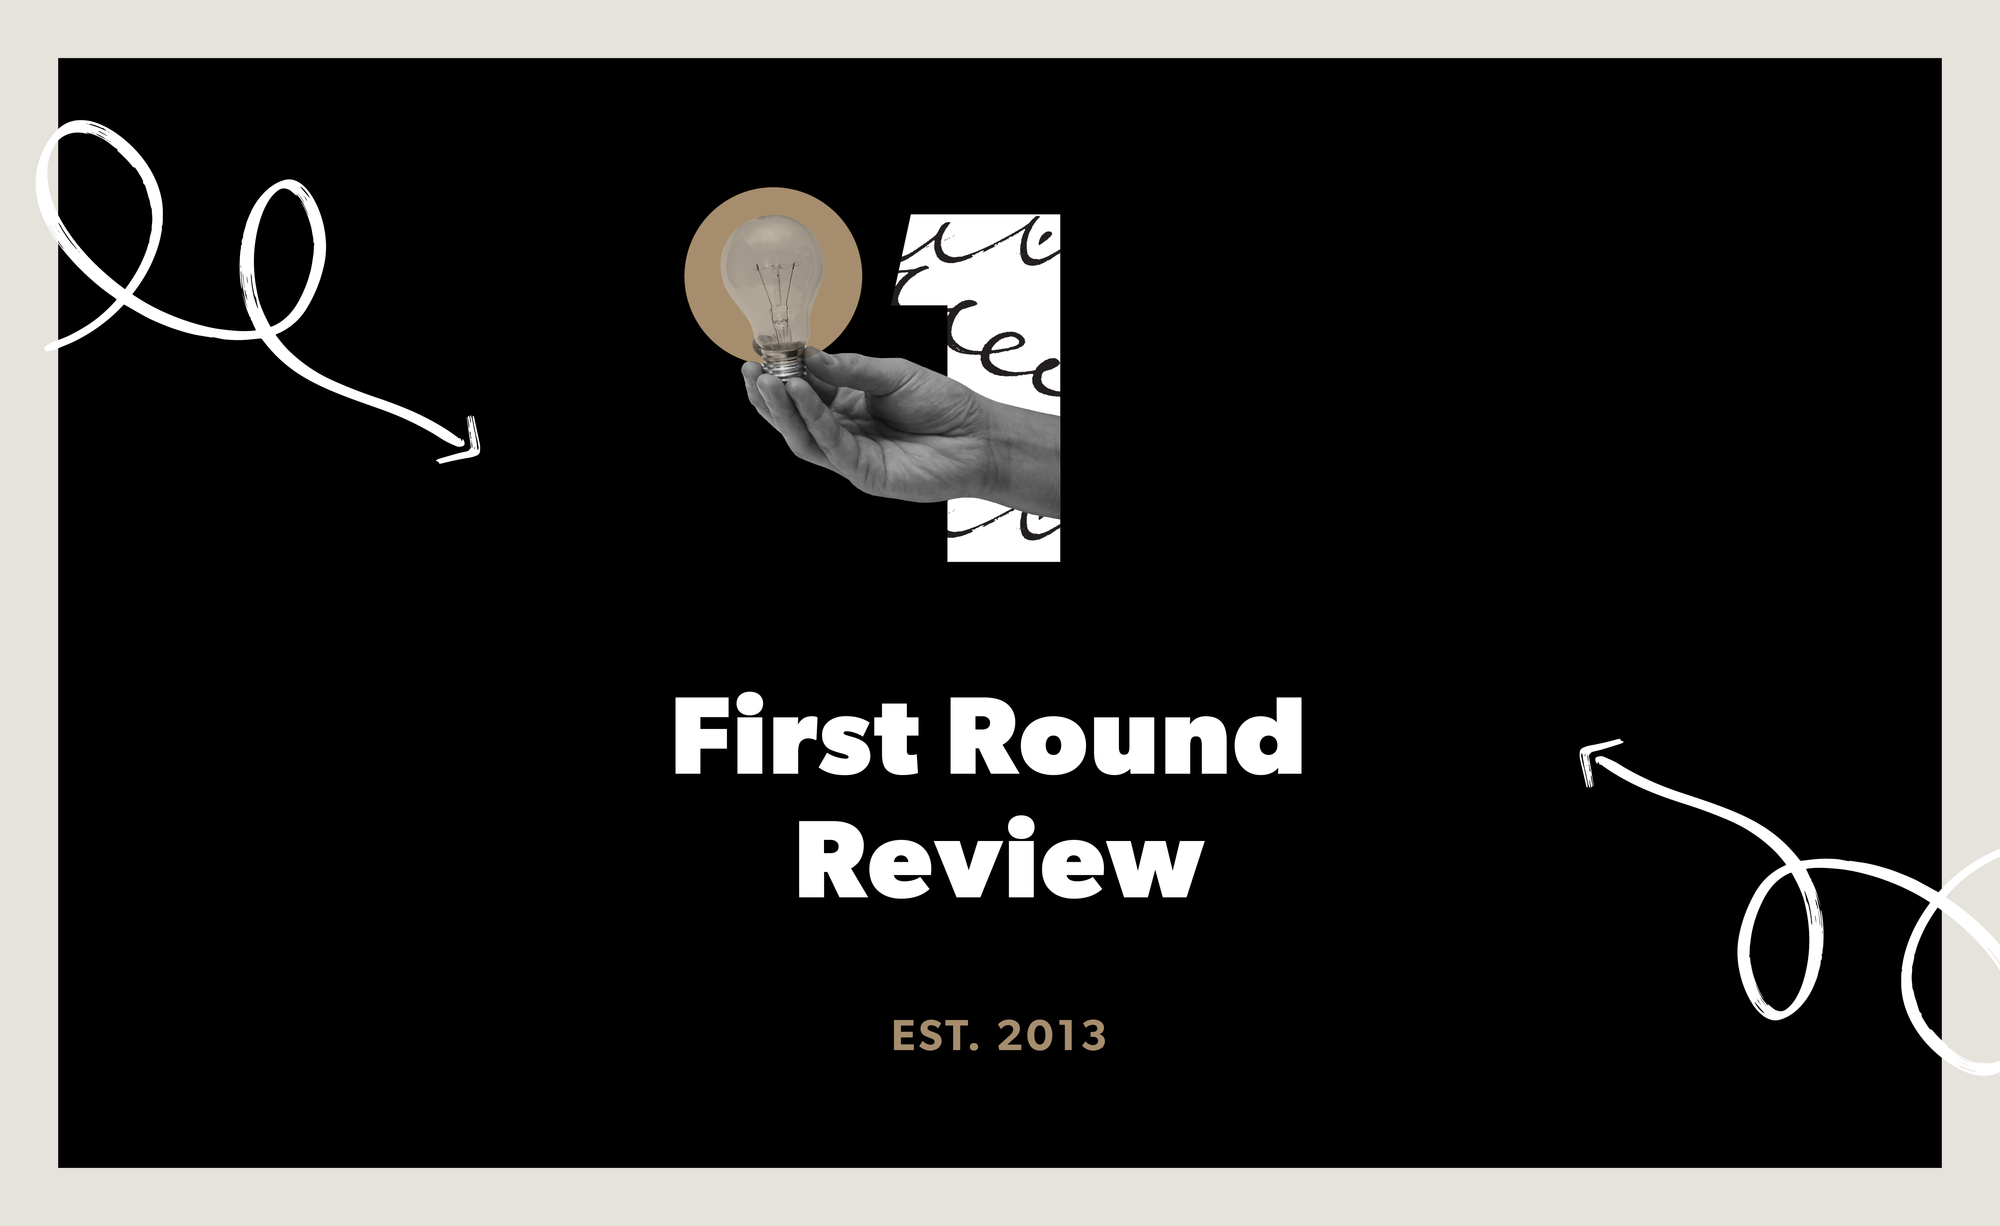 First Round Review